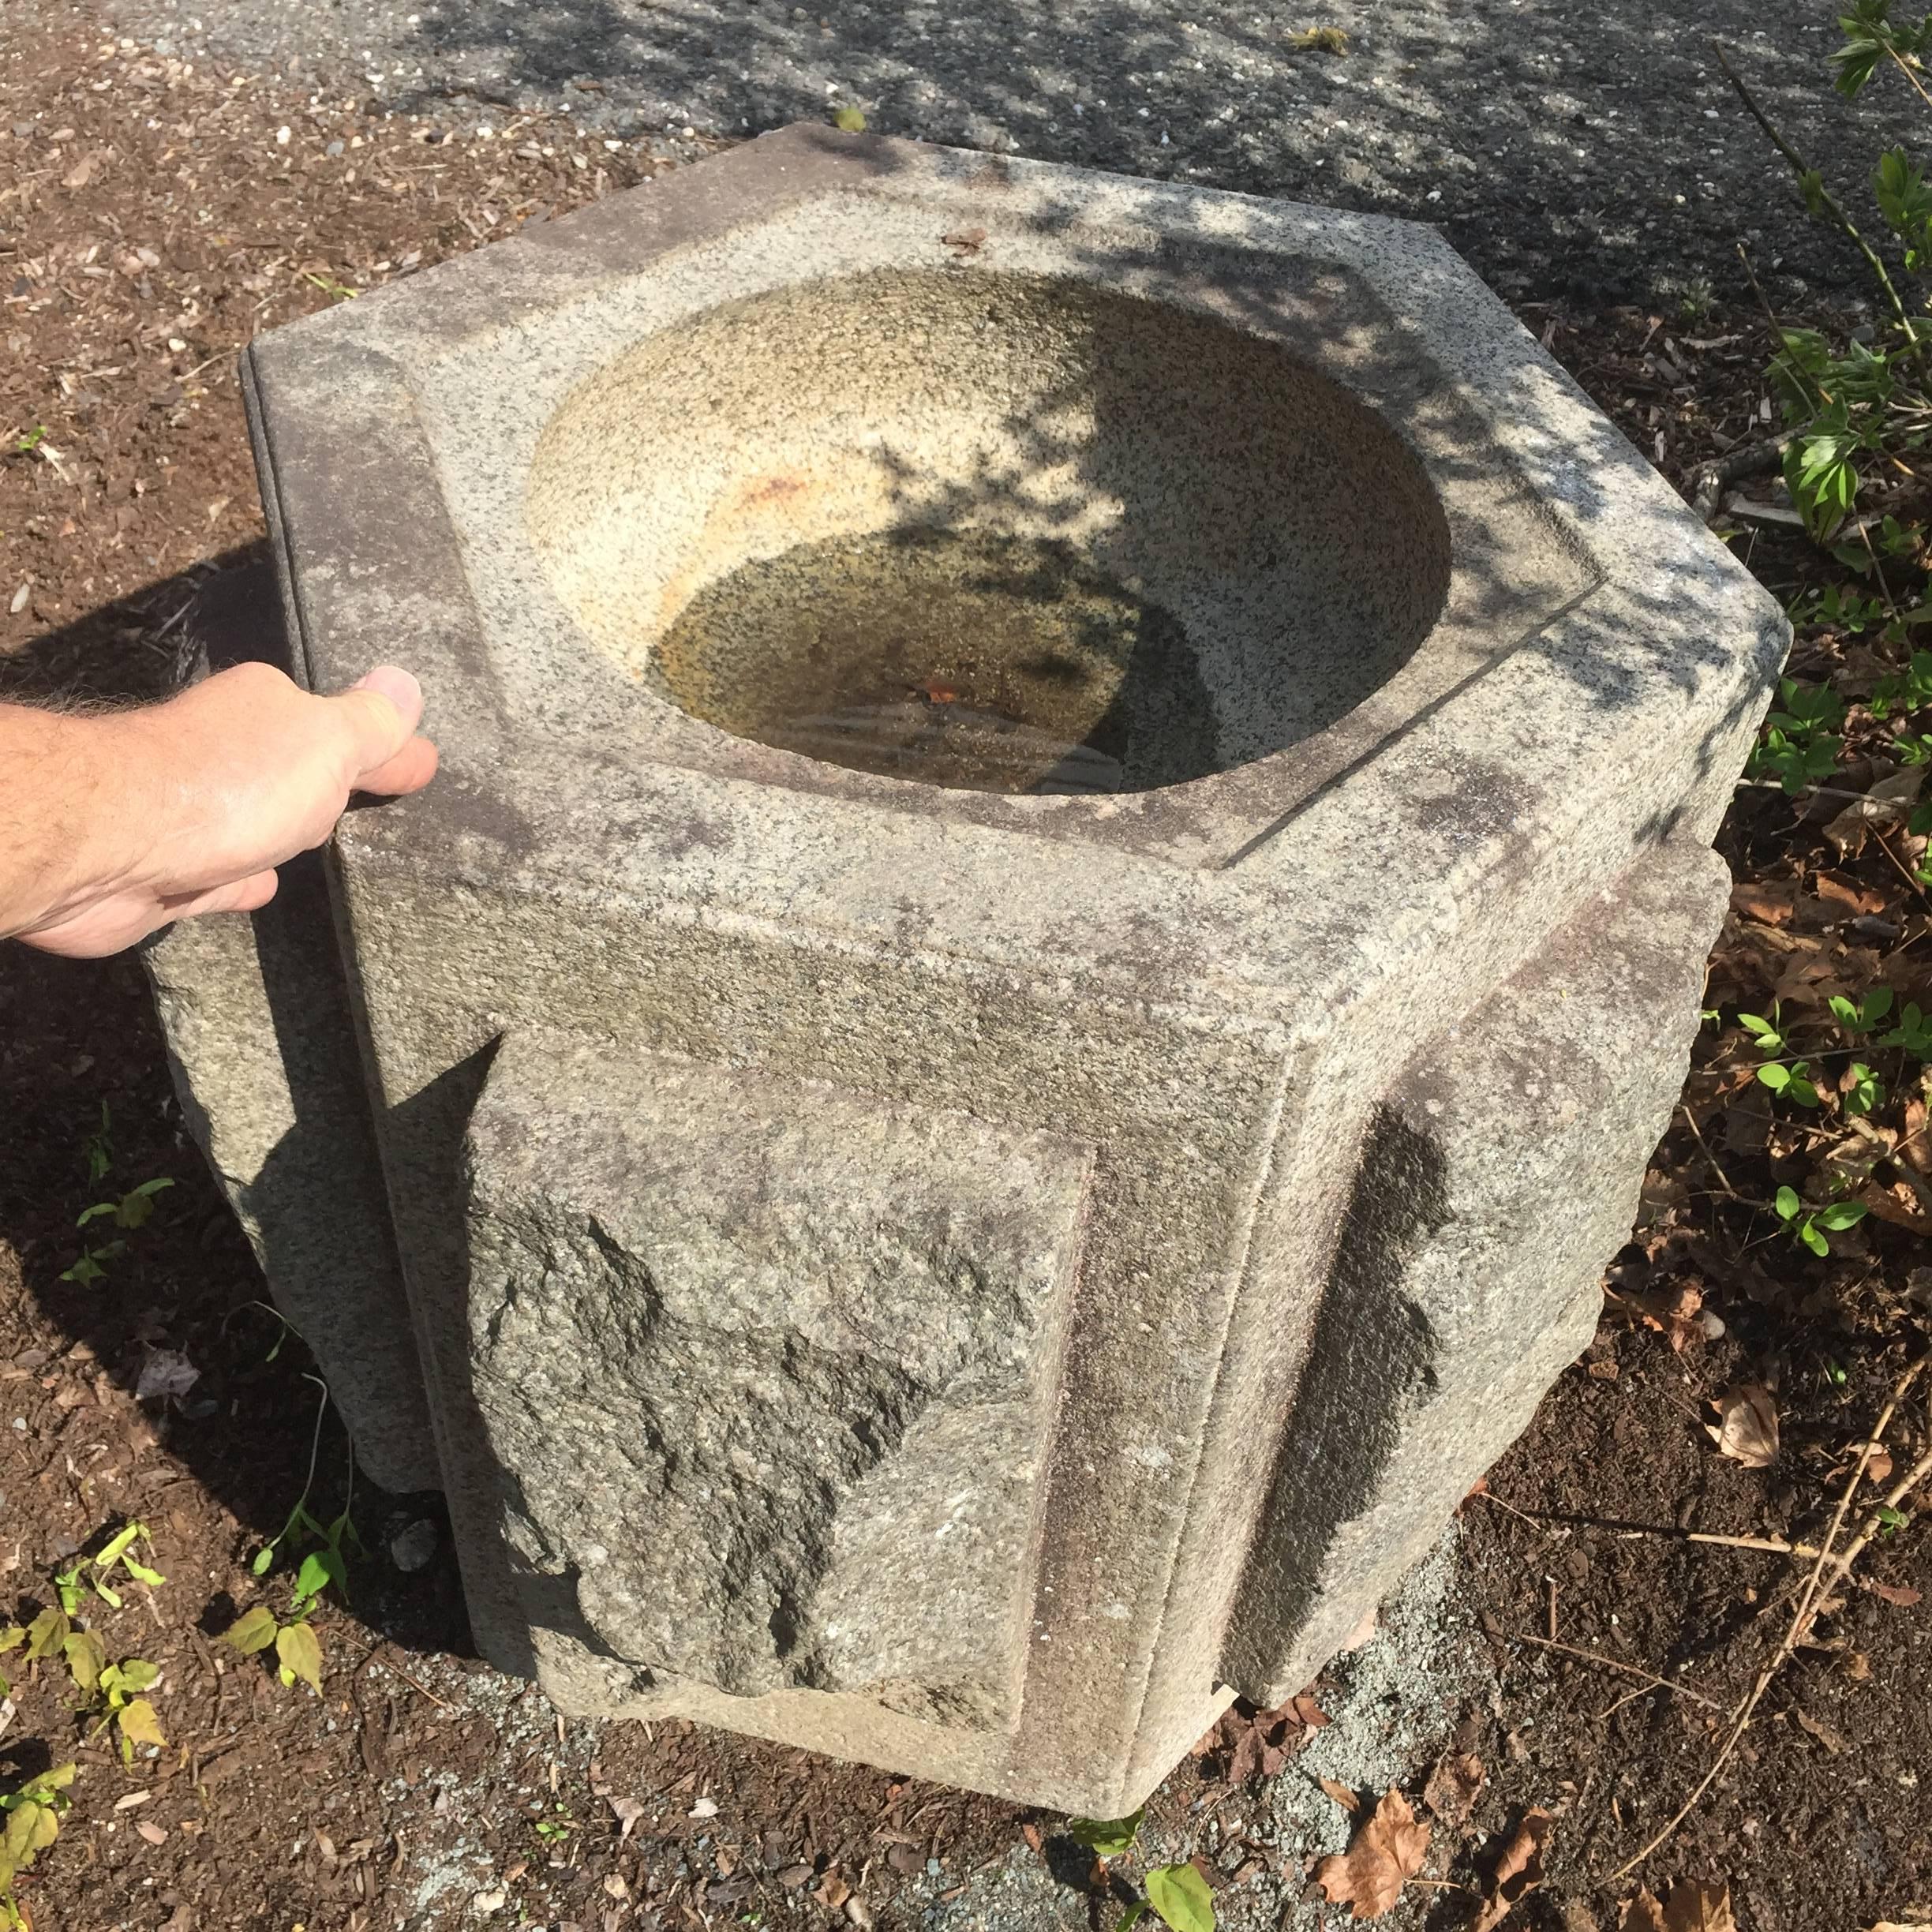 Japan, a stunning, unique large hand-carved antique solid granite stone planter or water basin -tsukubai- hand-cut from a large mountain boulder replete with natural rough  -mountain skin-  vertical external elements as shown. 

One of a kind and